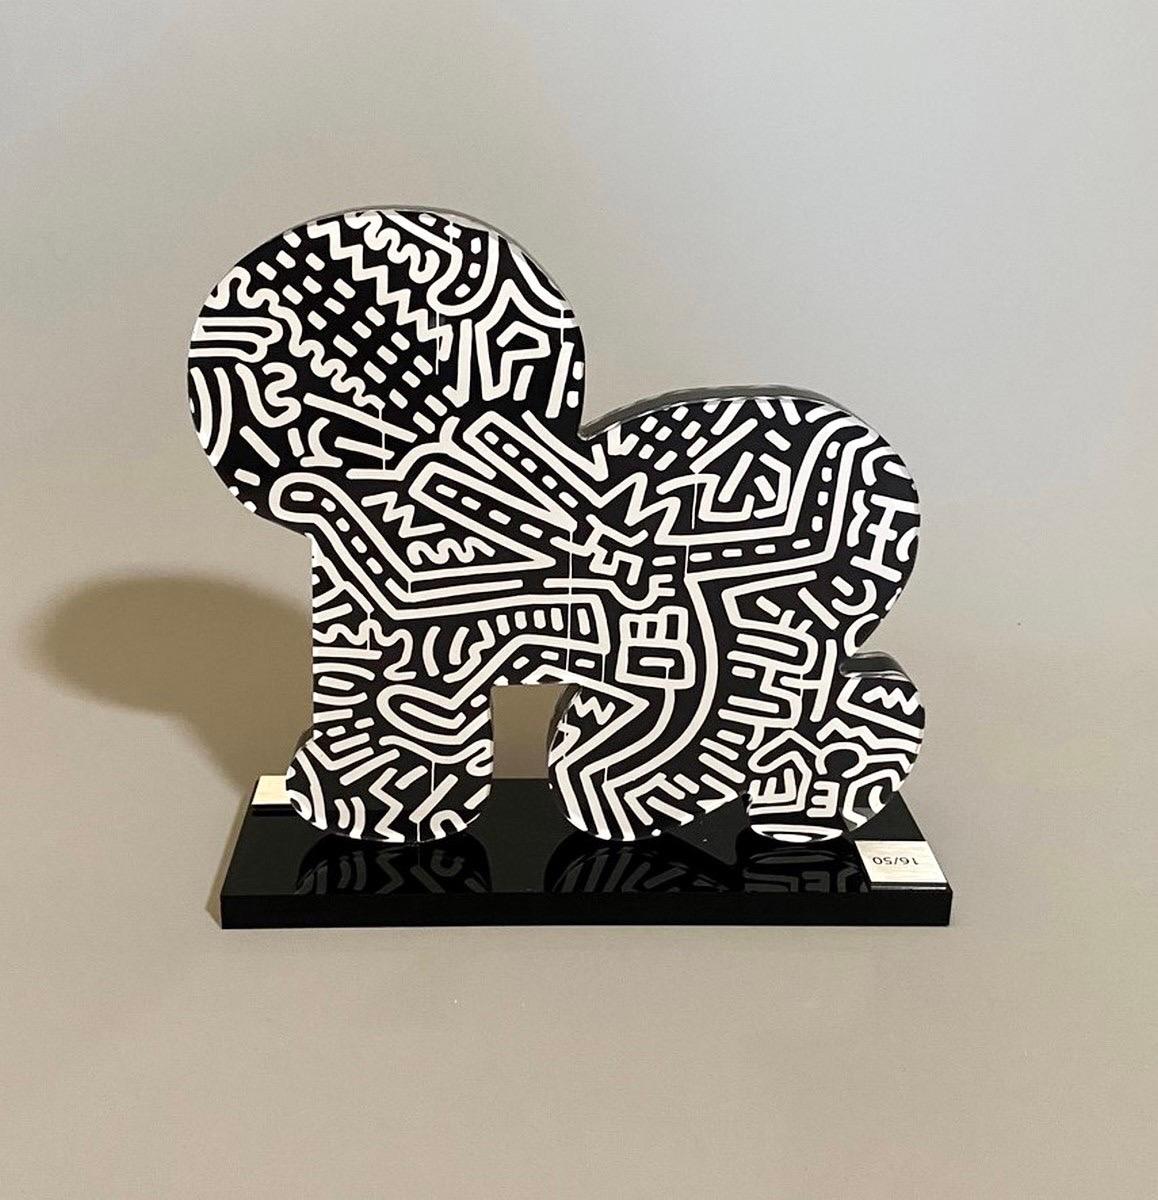 Baby (Yellow) - Sculpture by Keith Haring